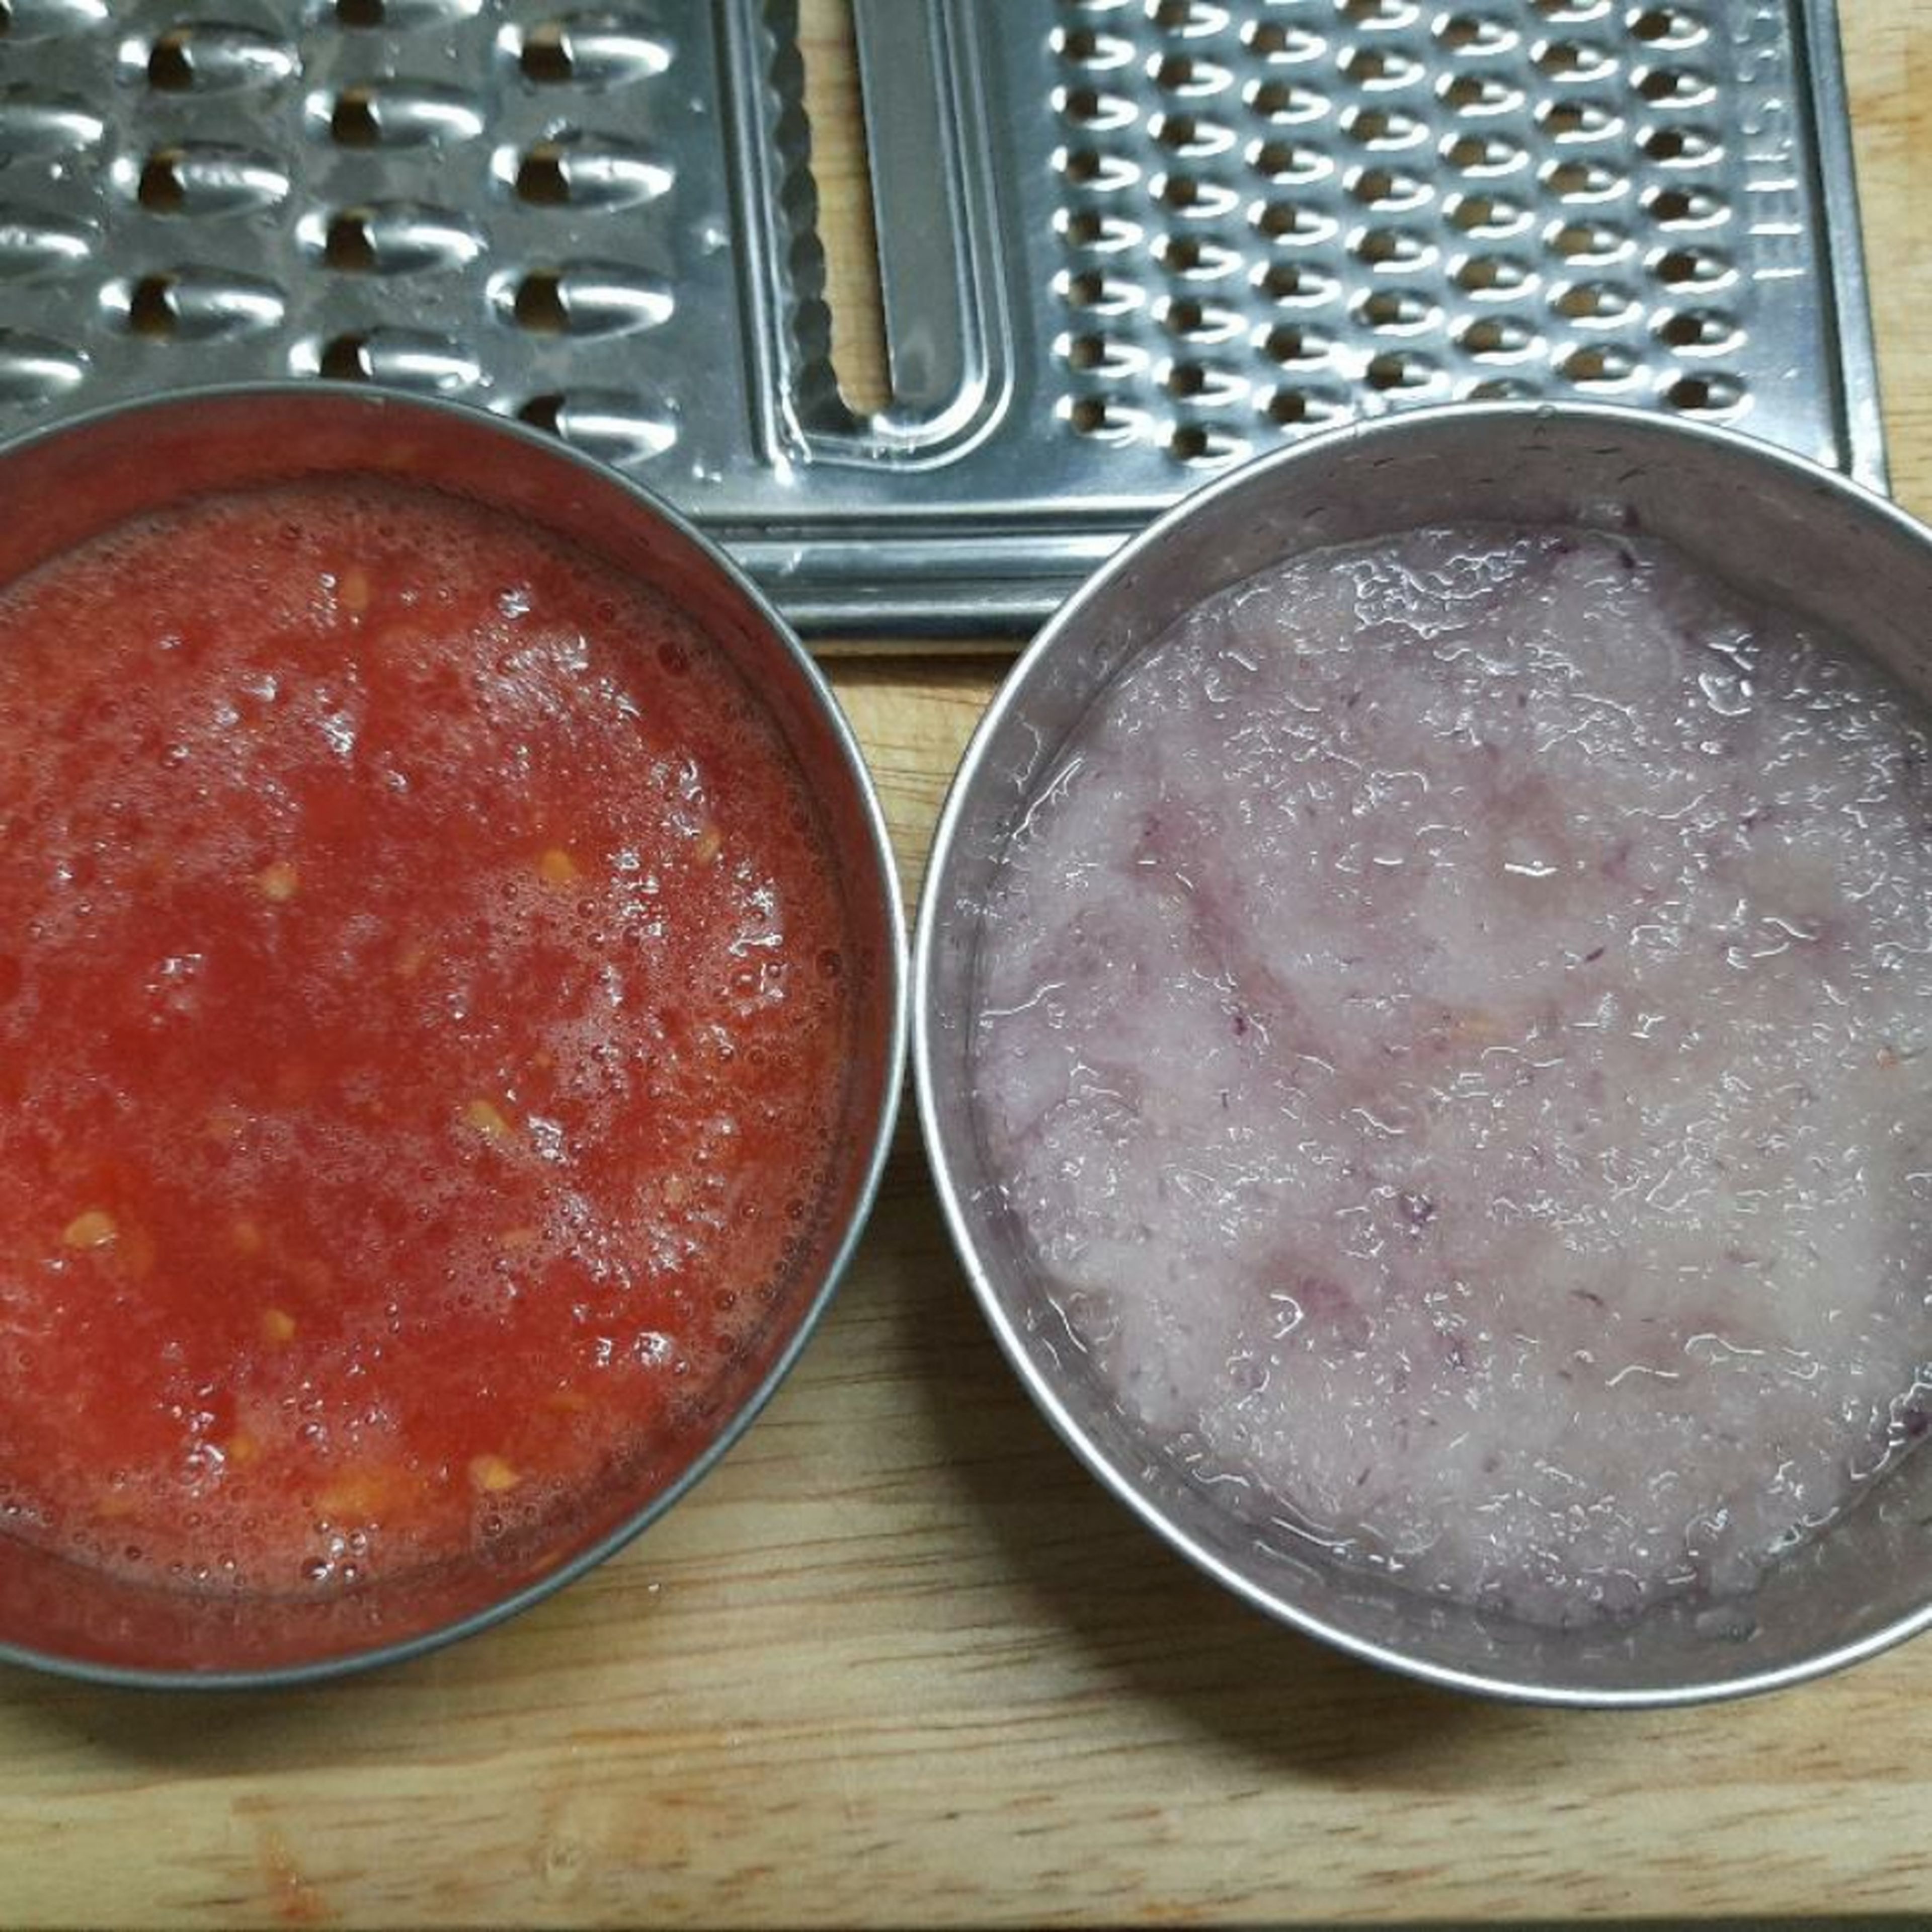 Take 2 medium tomatoes and 2 medium onions. Make puree for each. If you don't have a mixer, you can use the smallest holes in a grater to get puree like paste.